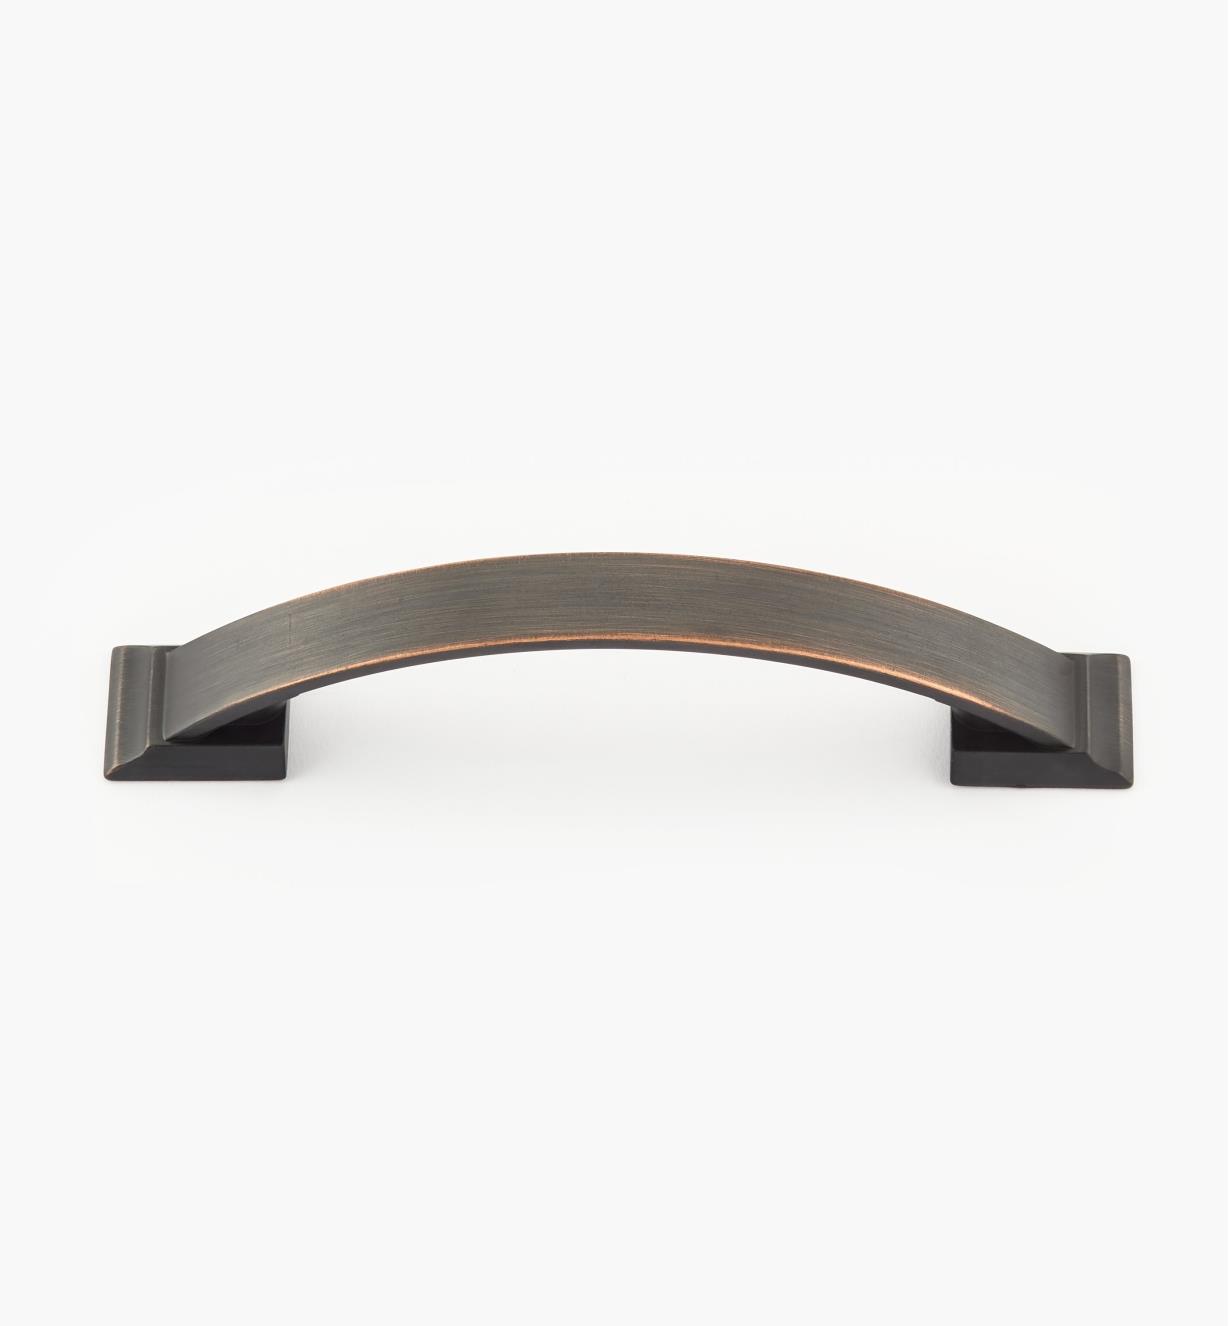 02A1942 - 96mm Oil-Rubbed Bronze Candler Handle